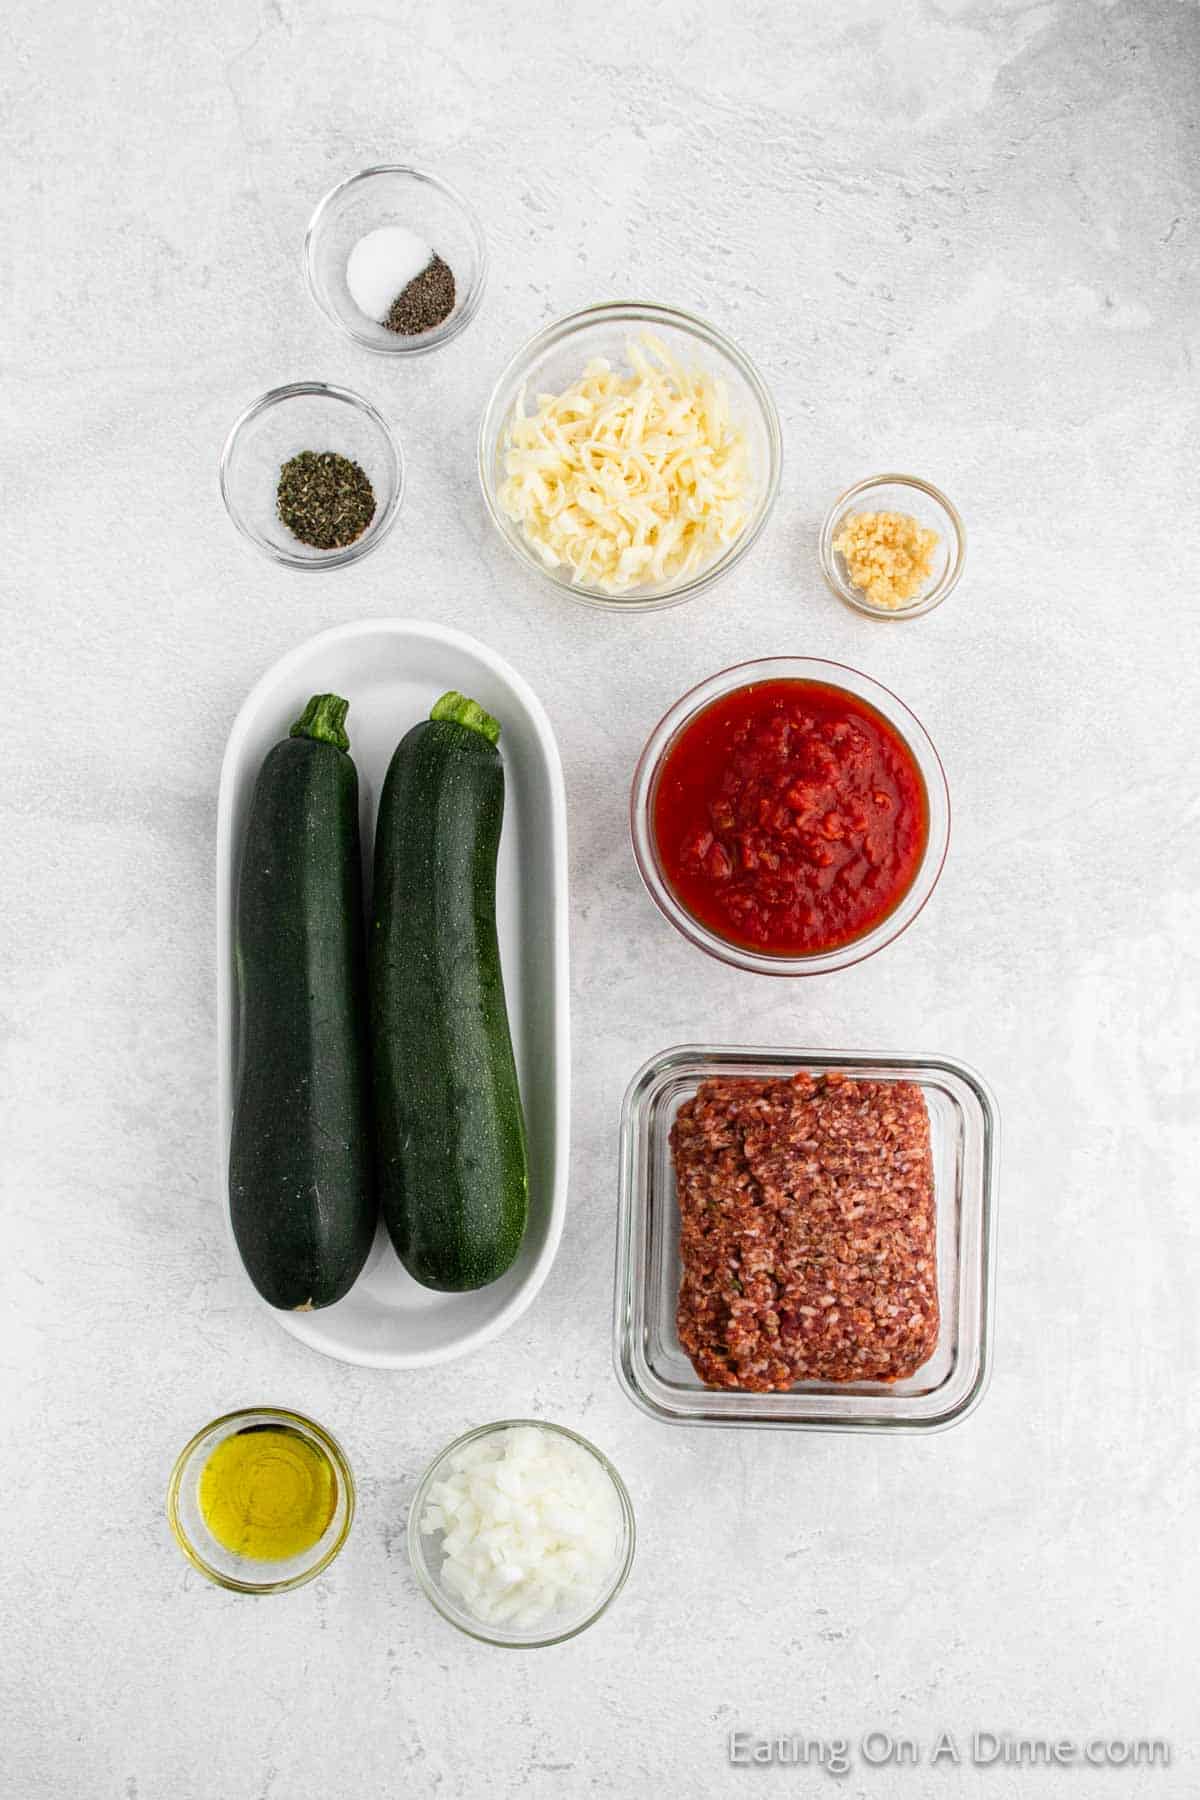 Ingredients for this stuffed zucchini boats recipe: two whole zucchinis, ground meat, marinara sauce, shredded cheese, minced garlic, chopped onions, olive oil, dried basil, salt, and pepper—neatly arranged on a light-colored countertop.